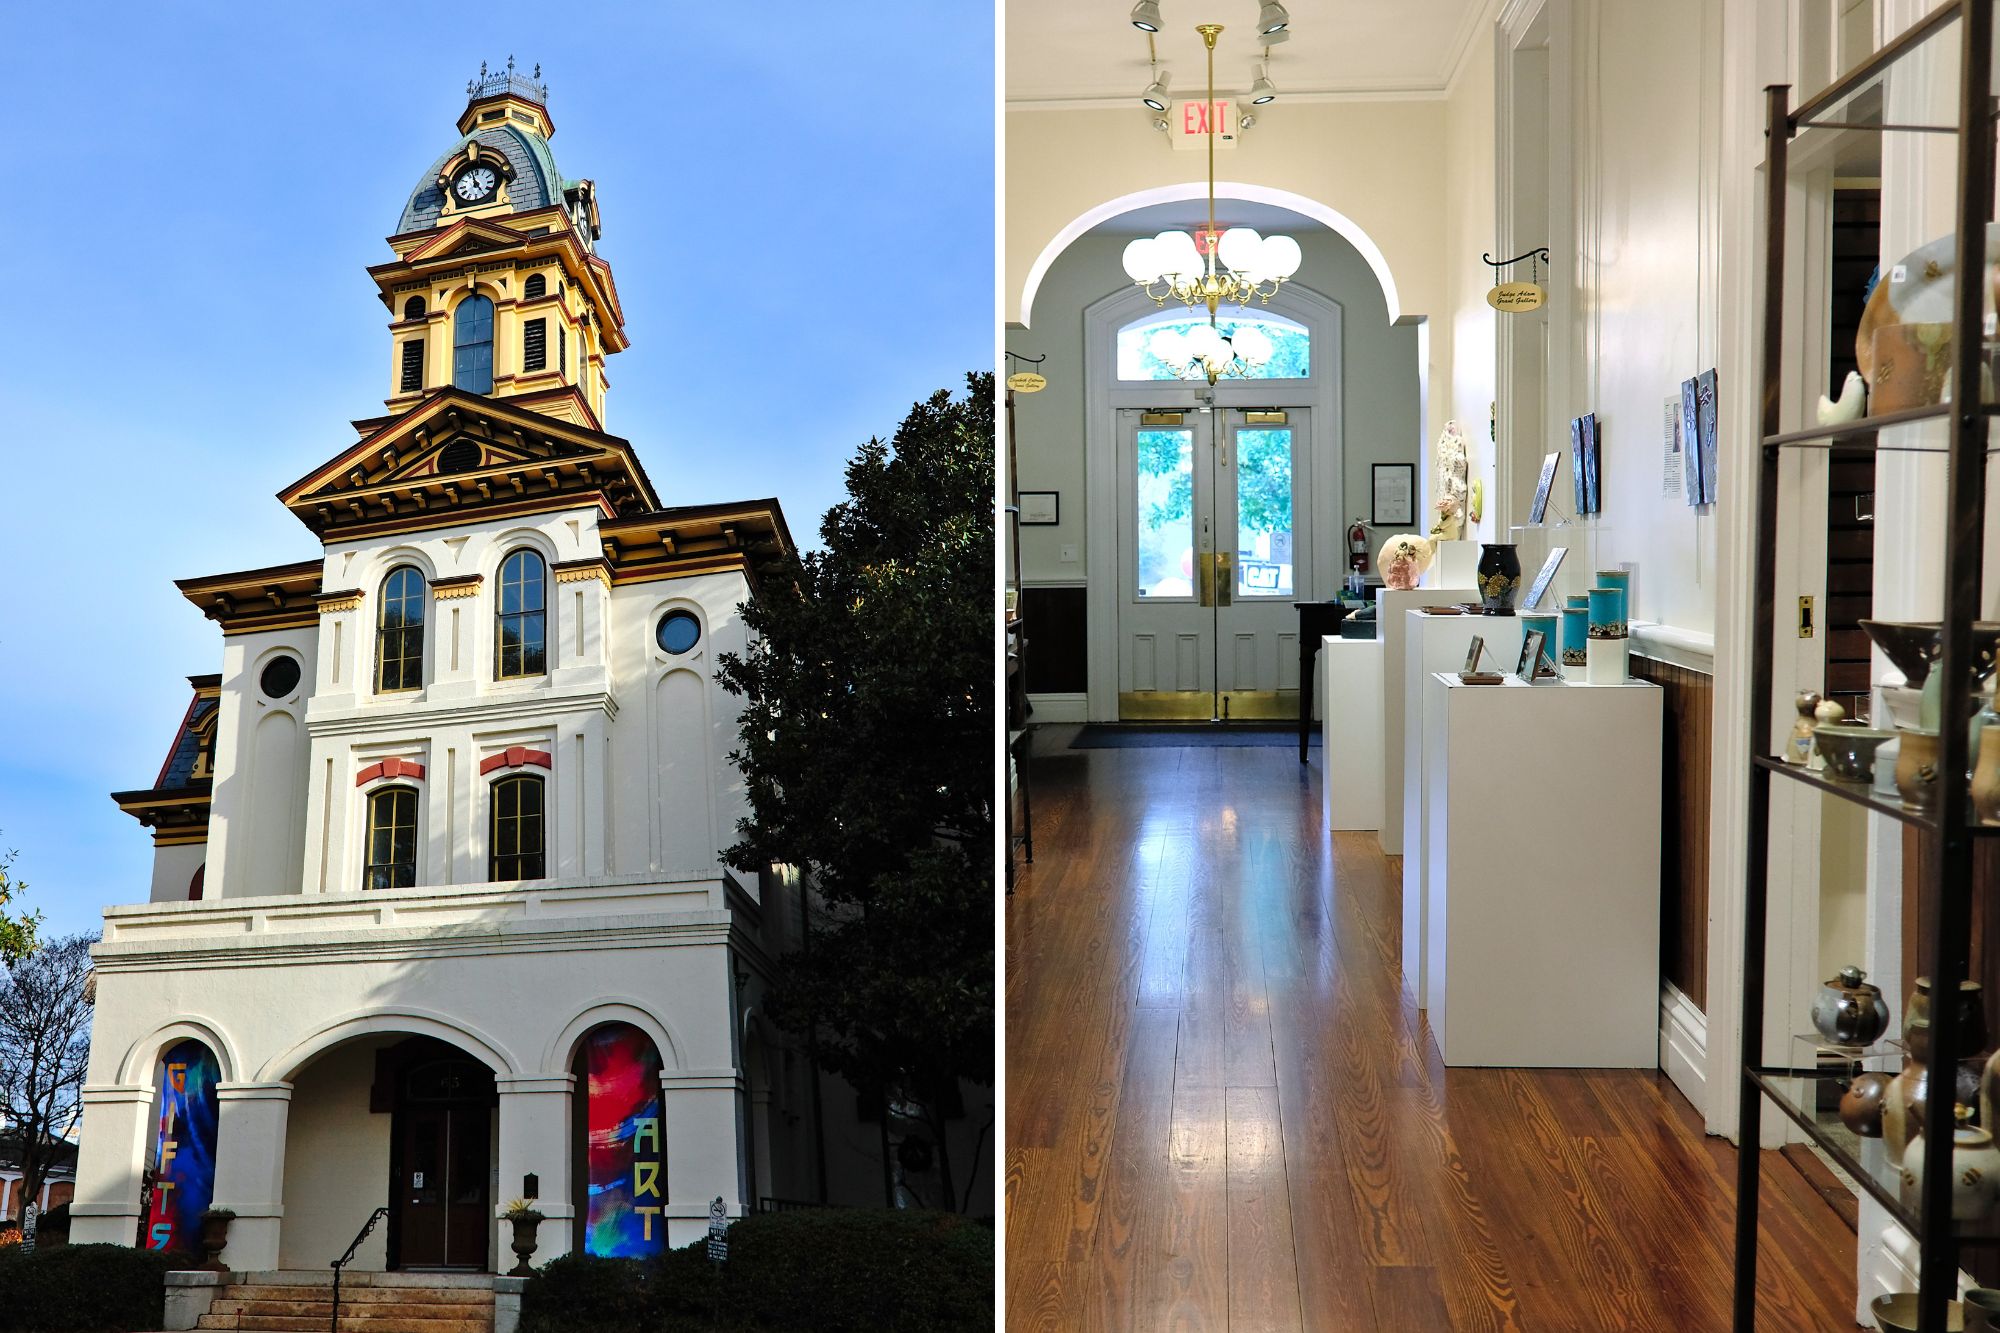 Exterior and Interior of The Galleries at Cabarrus Arts Council